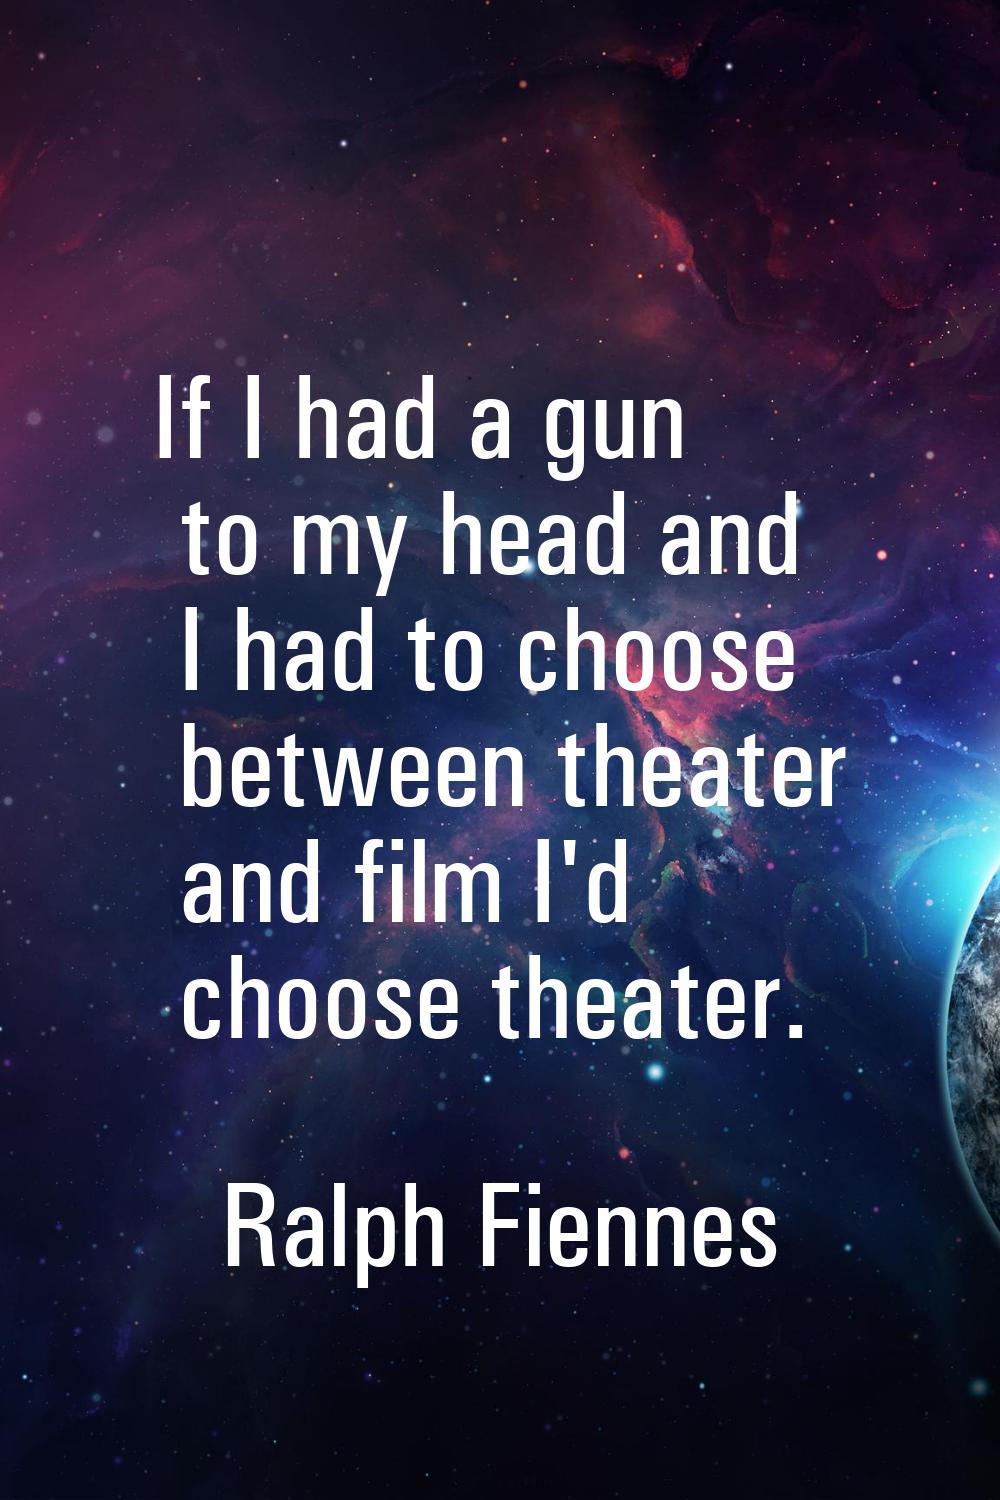 If I had a gun to my head and I had to choose between theater and film I'd choose theater.